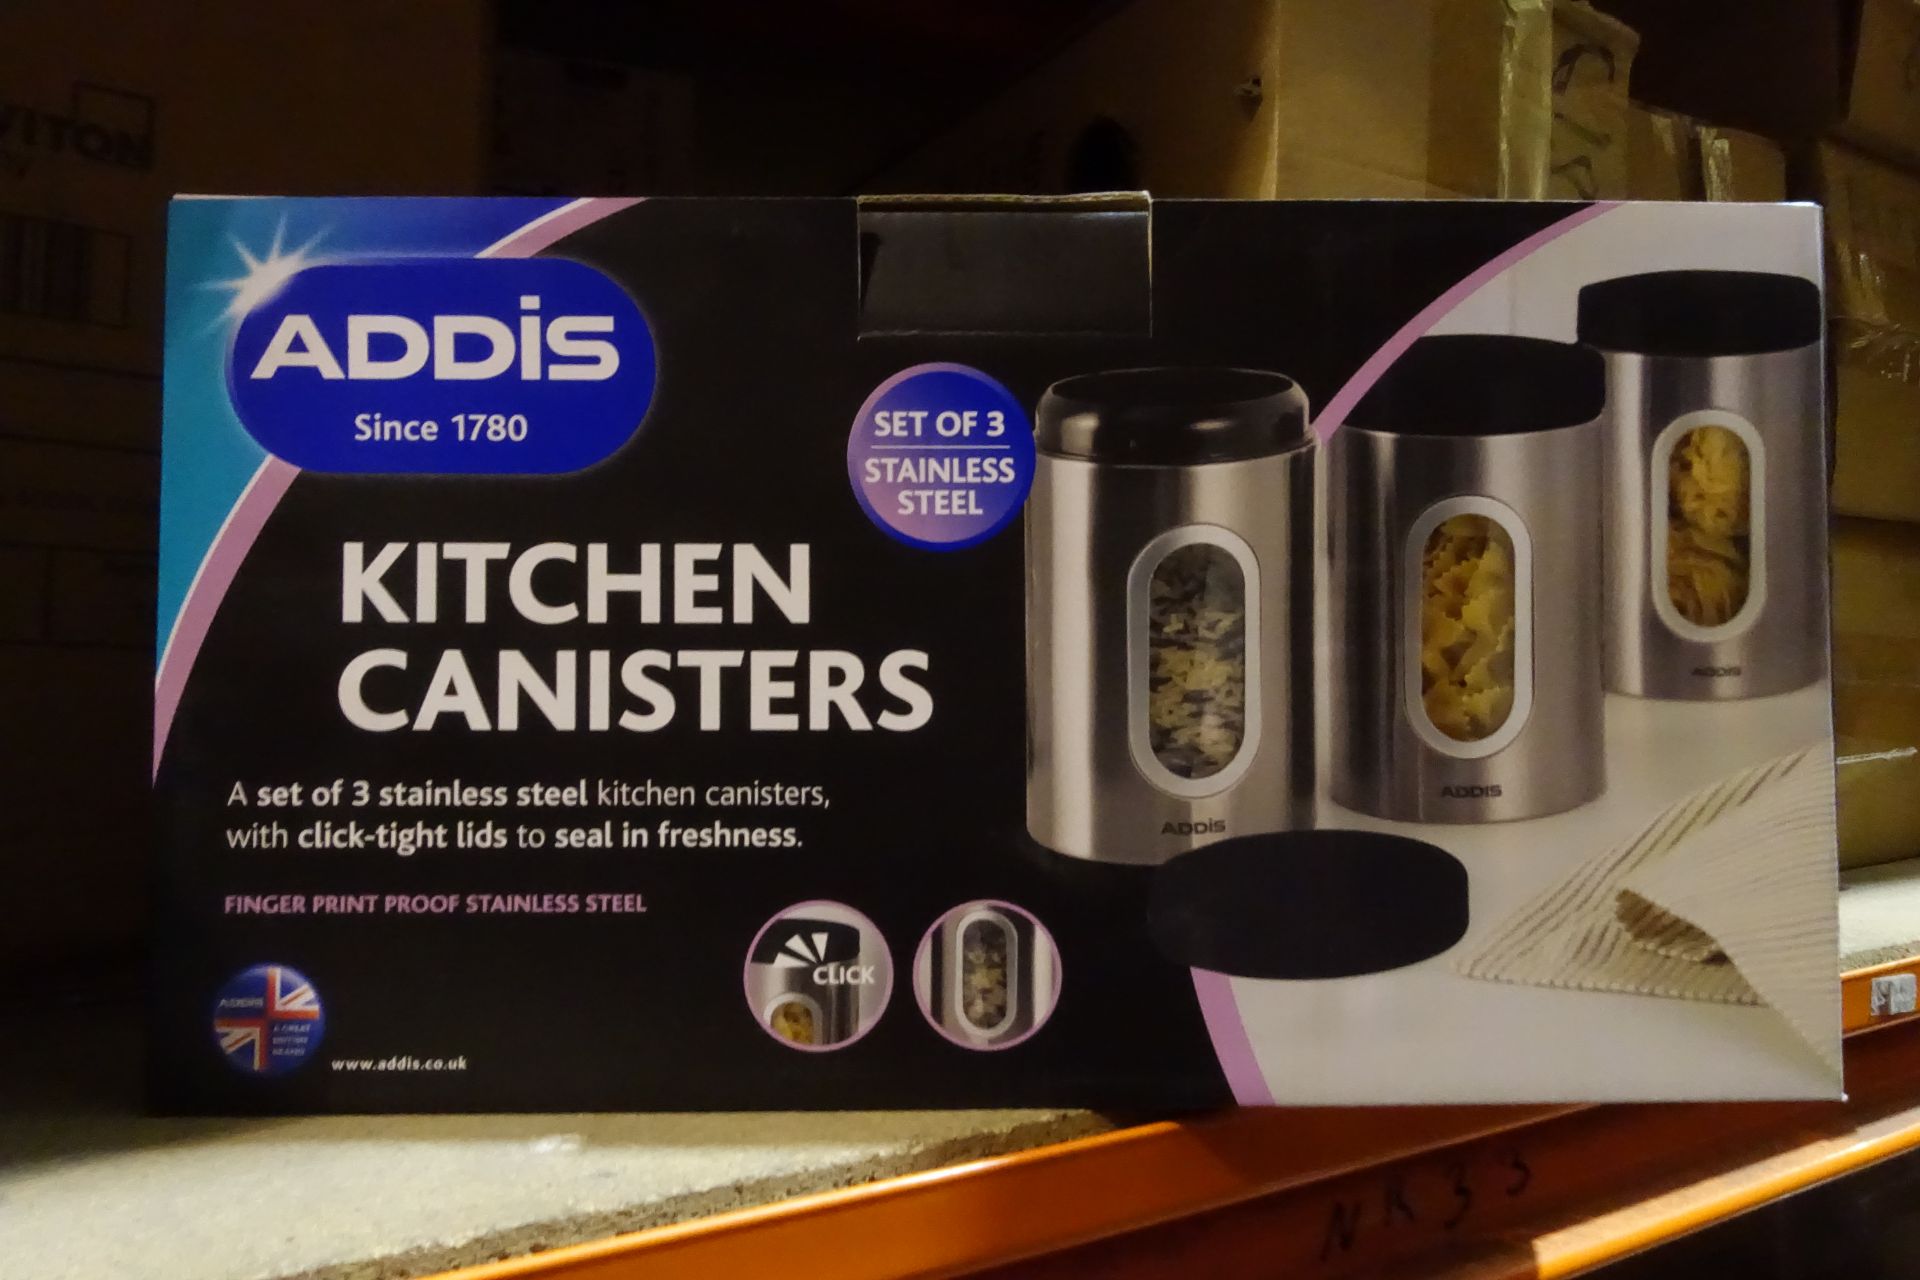 15 x Pack's of ADDI's 508453 Kitchen Cannisters 3 Per Box Stainless Steel Finish with Click Tight